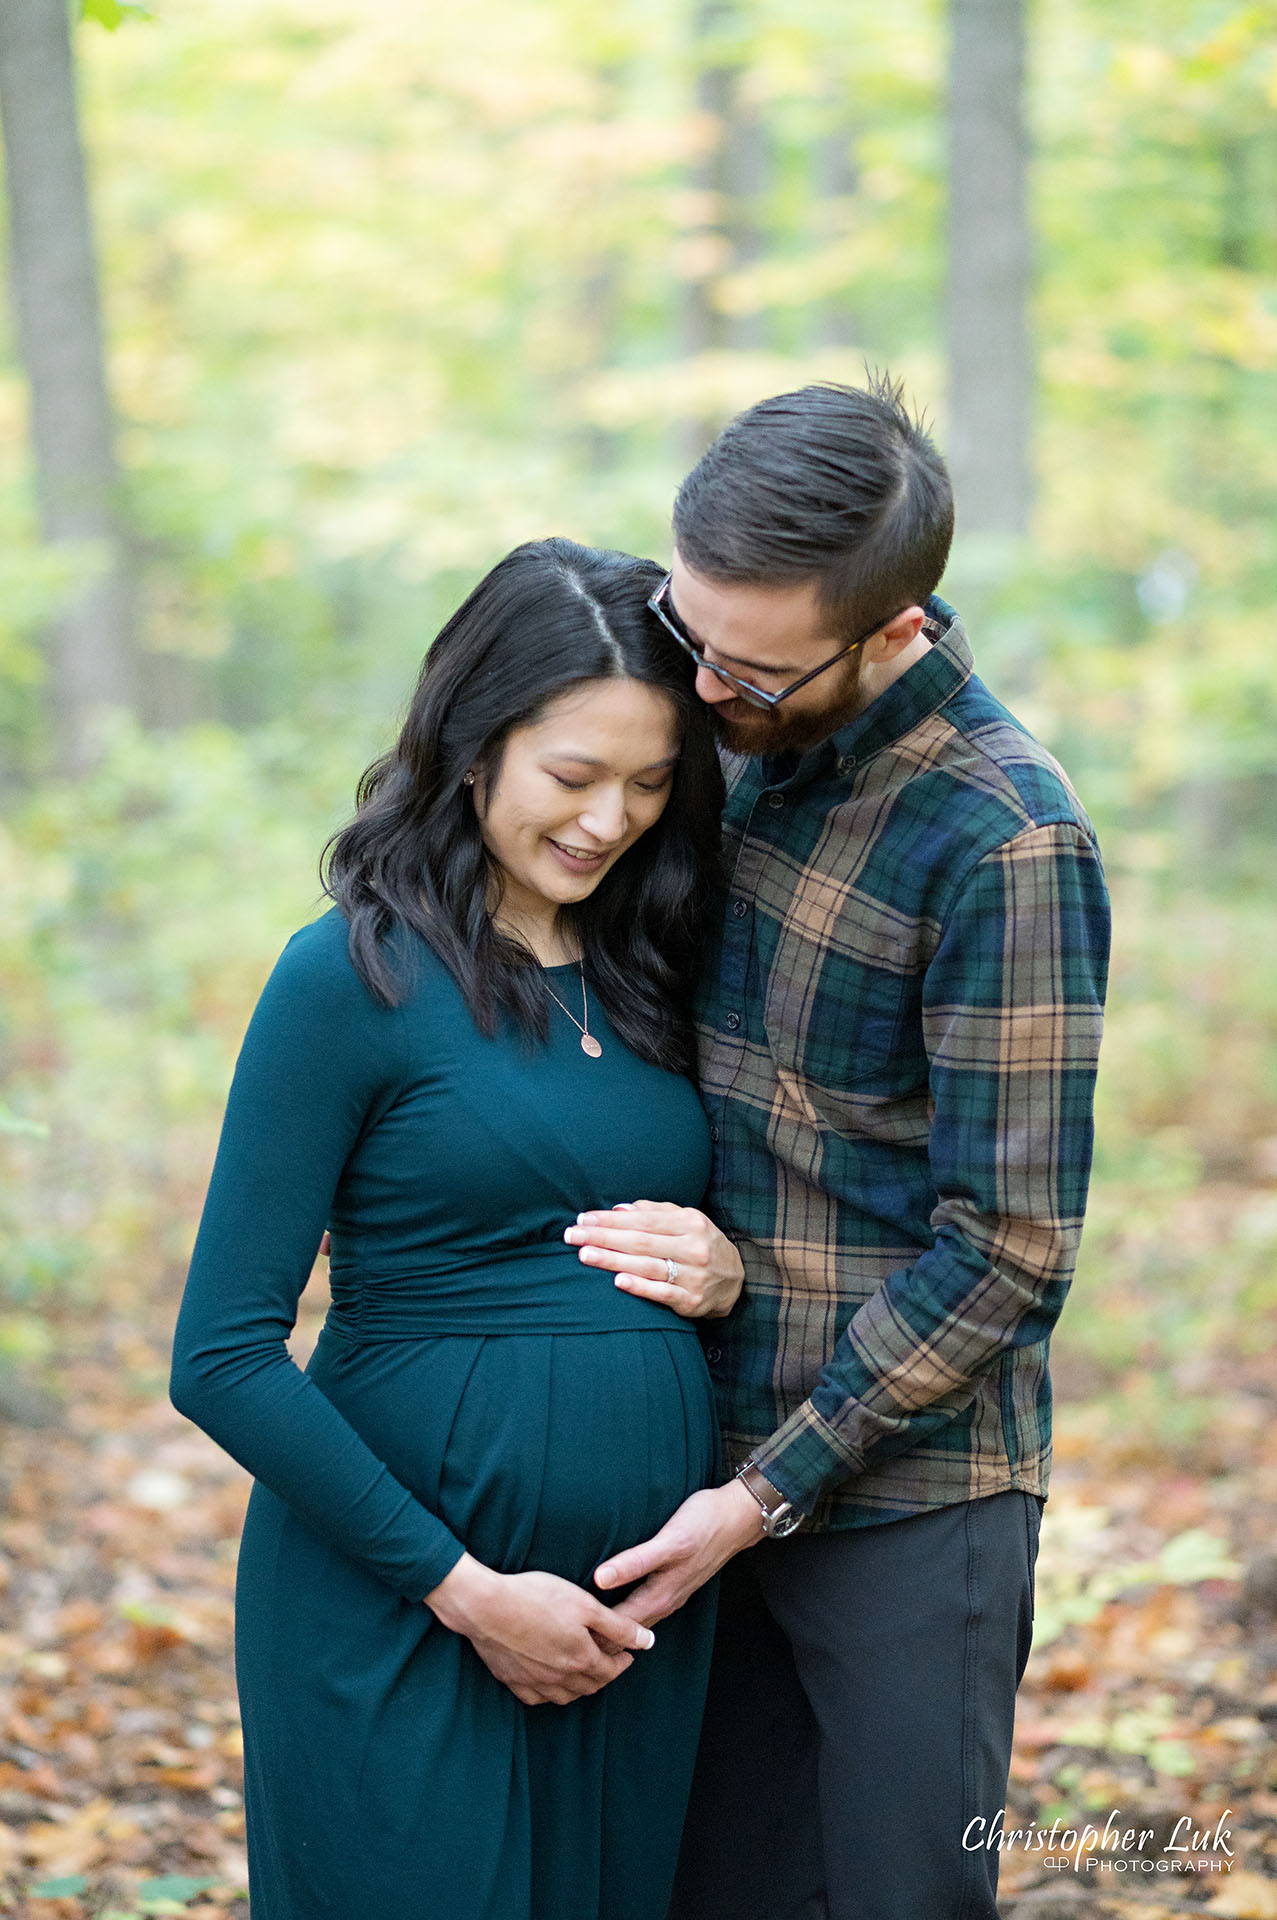 Markham Pregnancy Photos Pictures Toronto Maternity Photographer Mother Father Motherhood Fatherhood Baby Bump Candid Natural Photojournalistic Forest Trail Fall Autumn Leaves Portrait